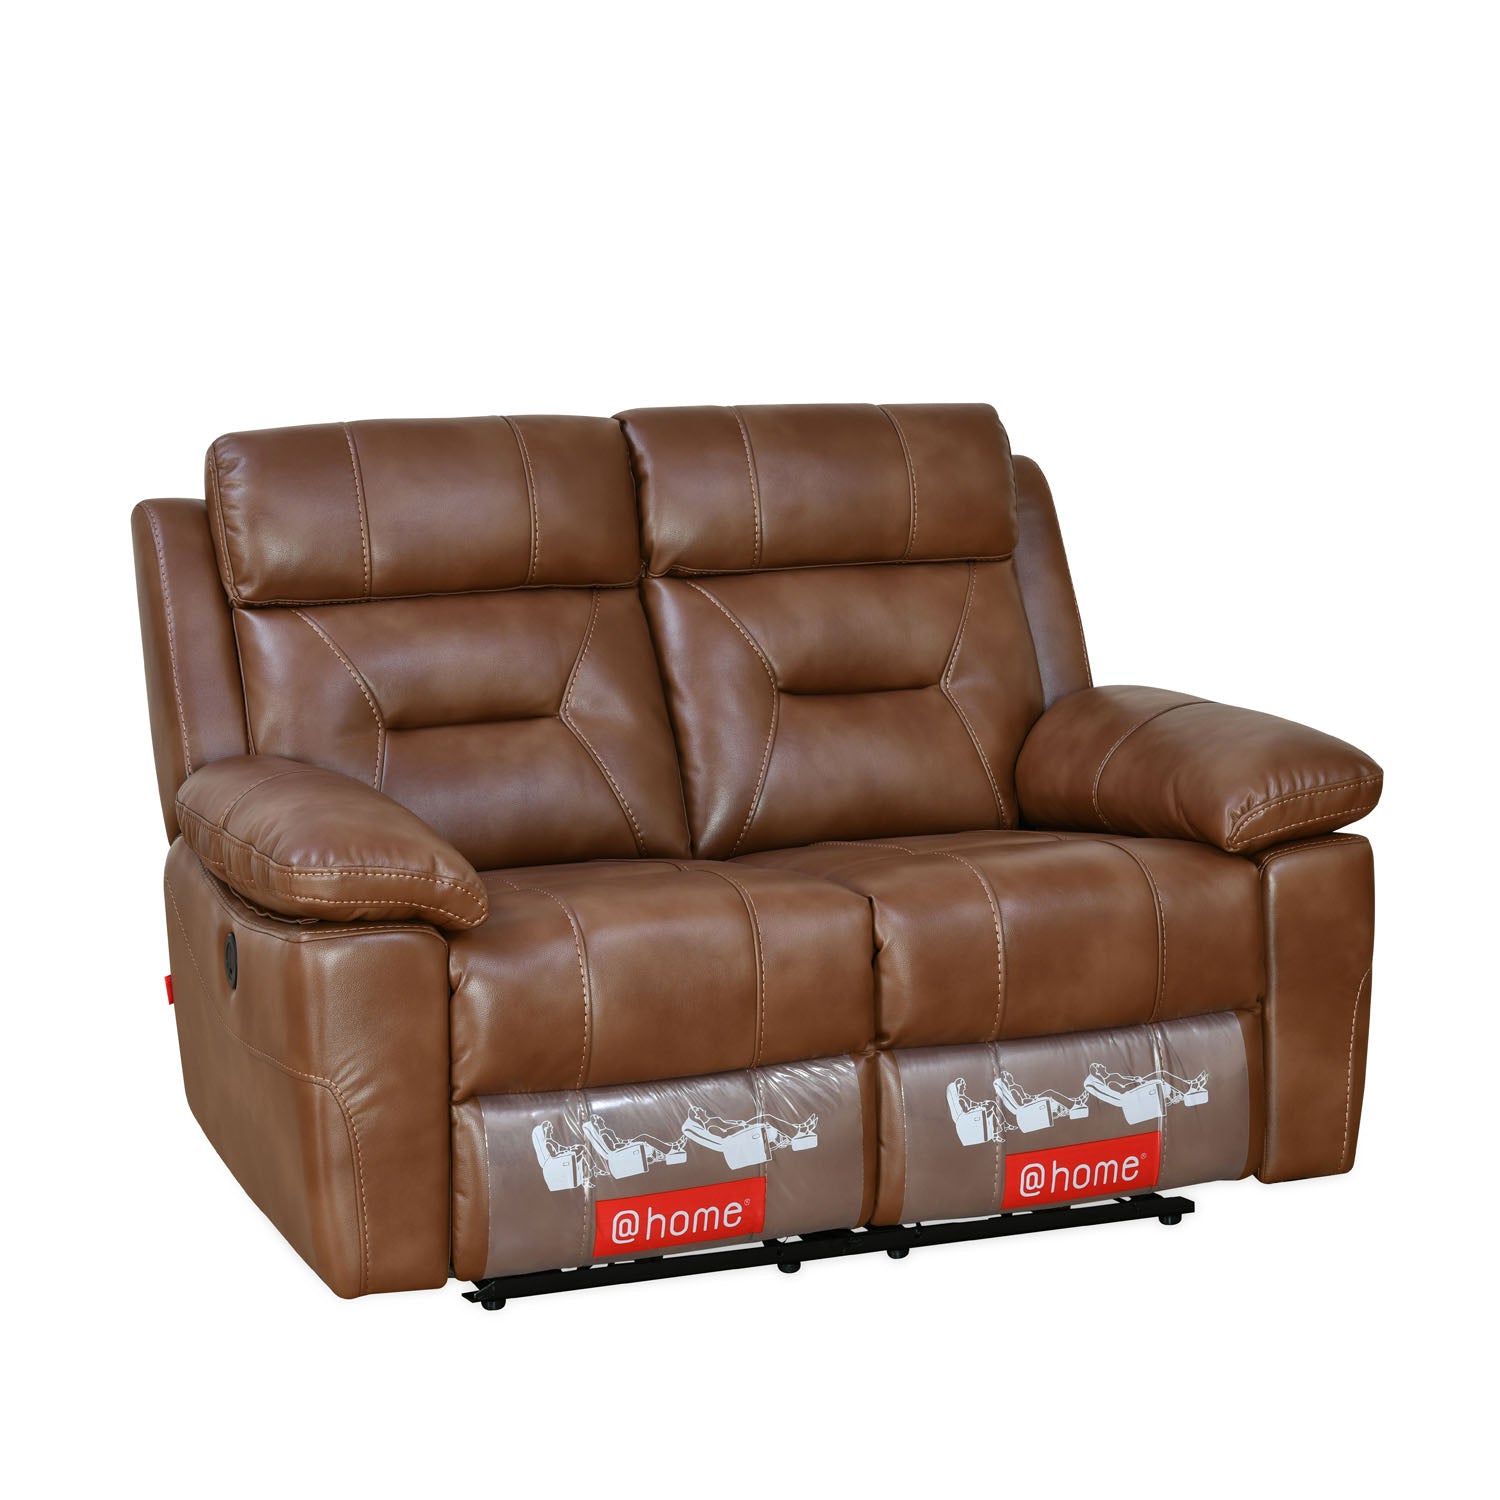 Delp 2 Seater Nappa Aire Leather Electric Recliner (Choco Brown)